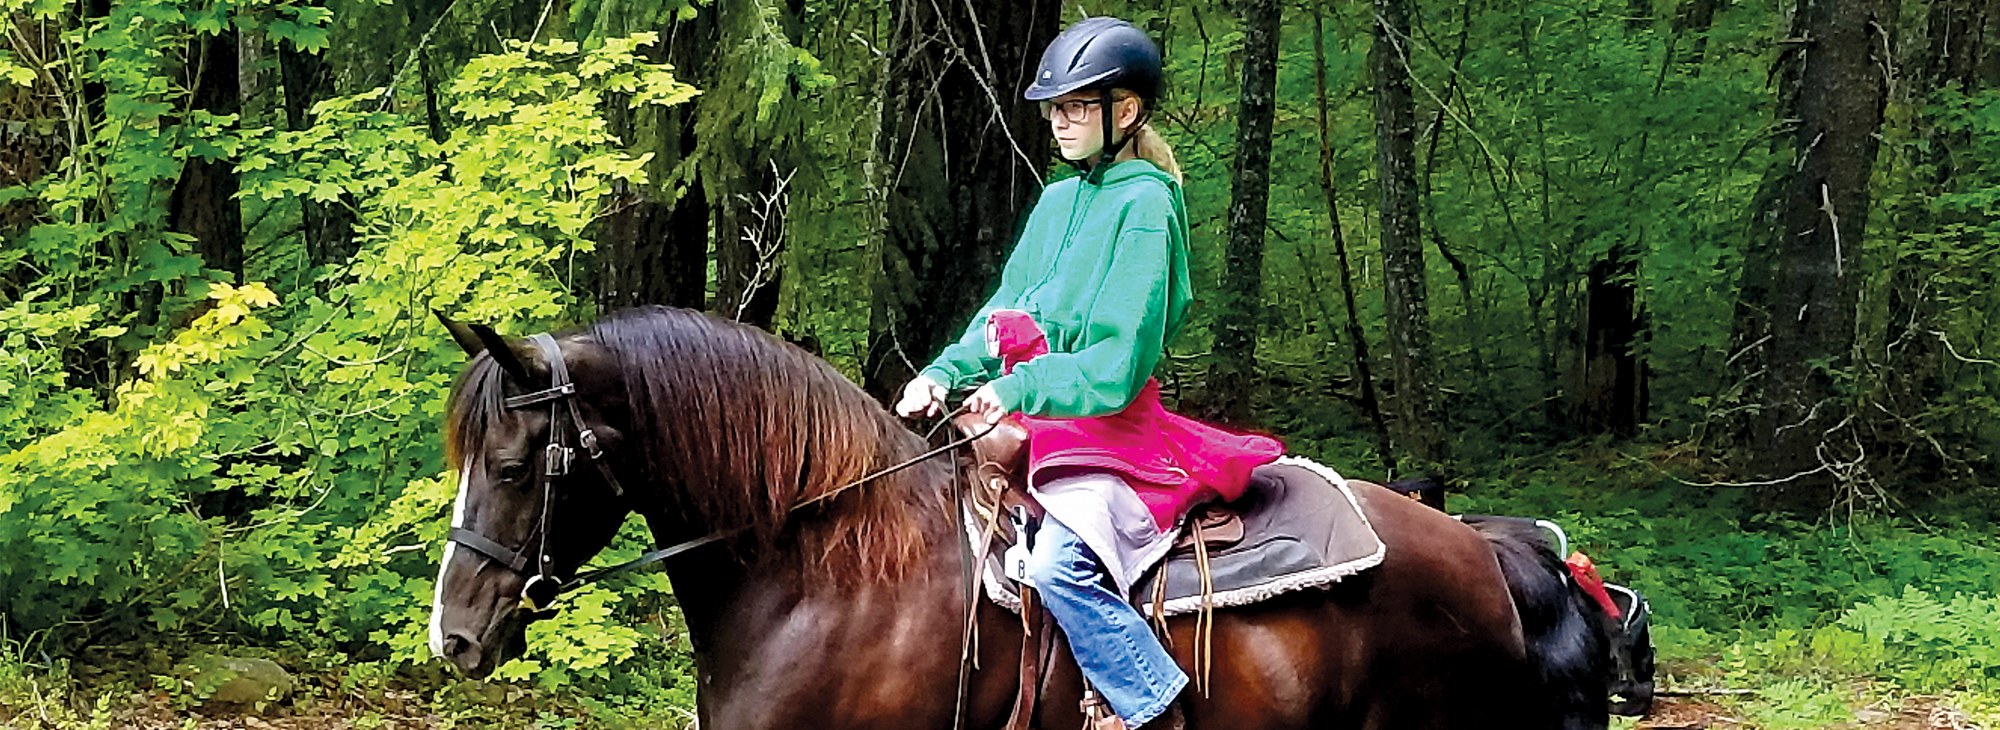 Girl riding her Morgan horse in the Forest